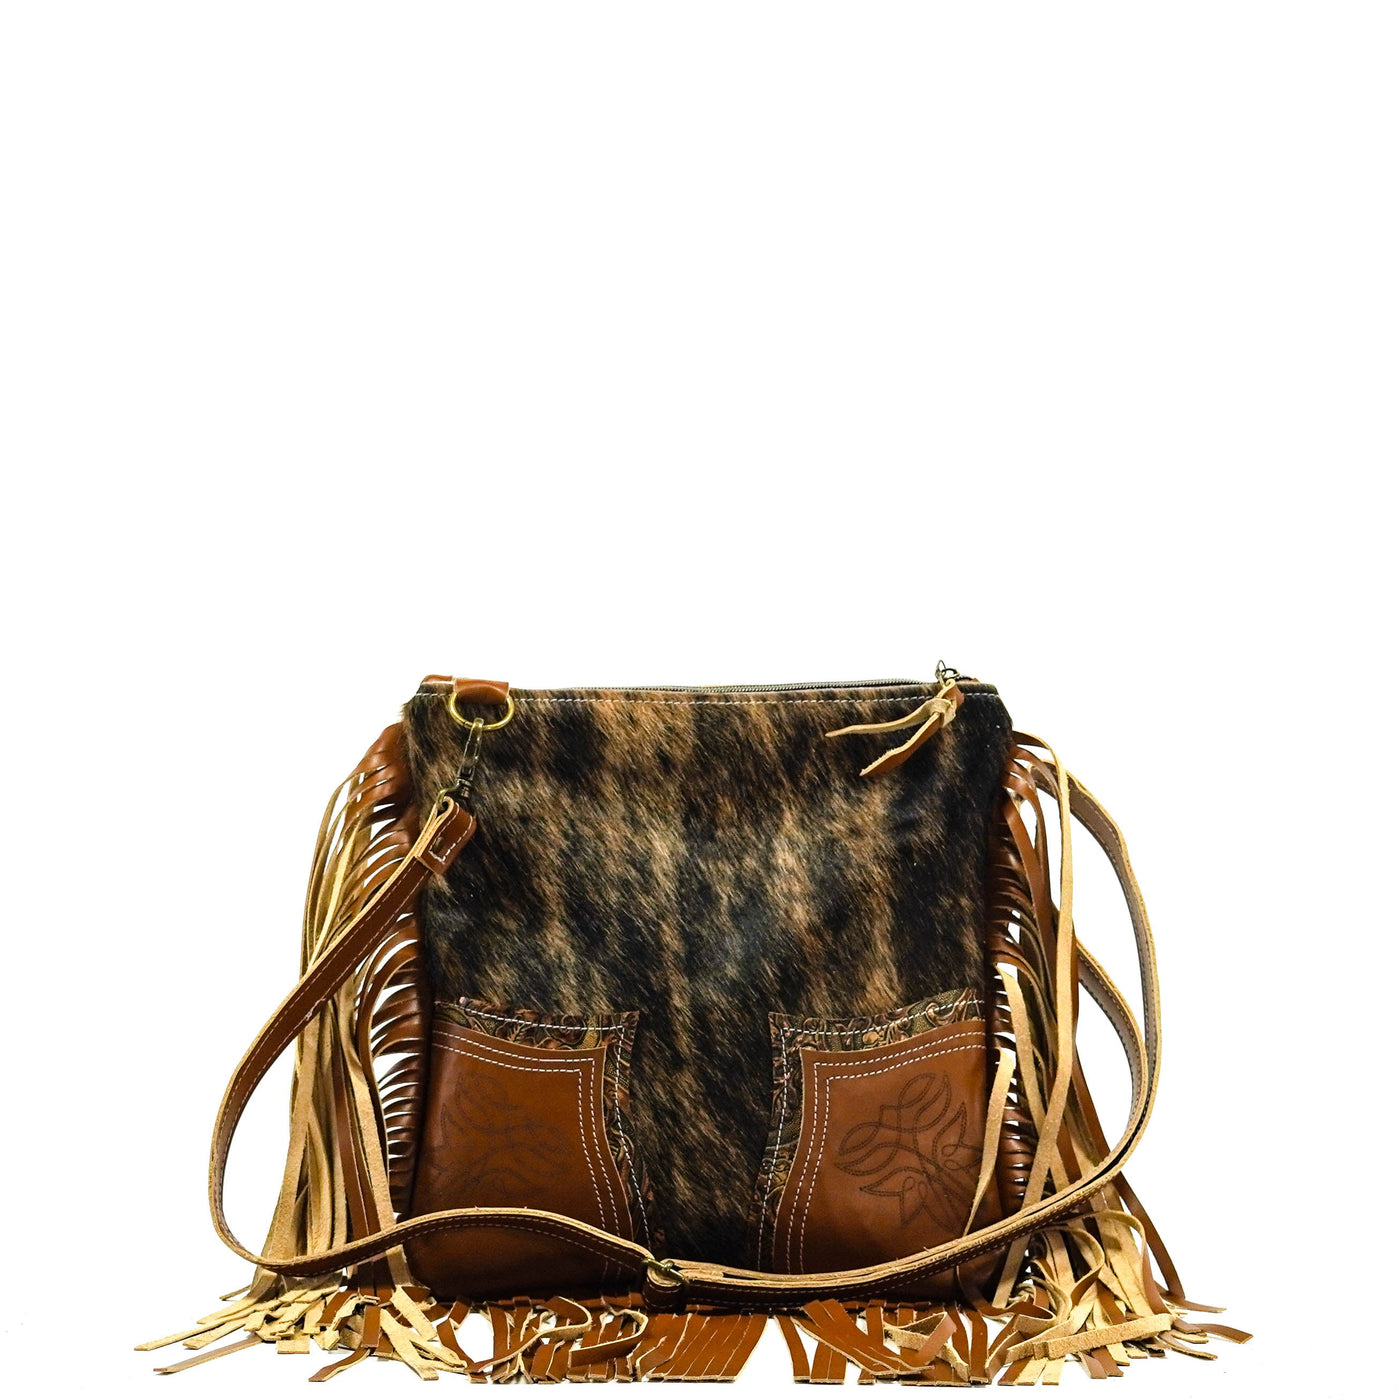 Shania - Two-Tone Brindle w/ Wyoming Tool-Shania-Western-Cowhide-Bags-Handmade-Products-Gifts-Dancing Cactus Designs